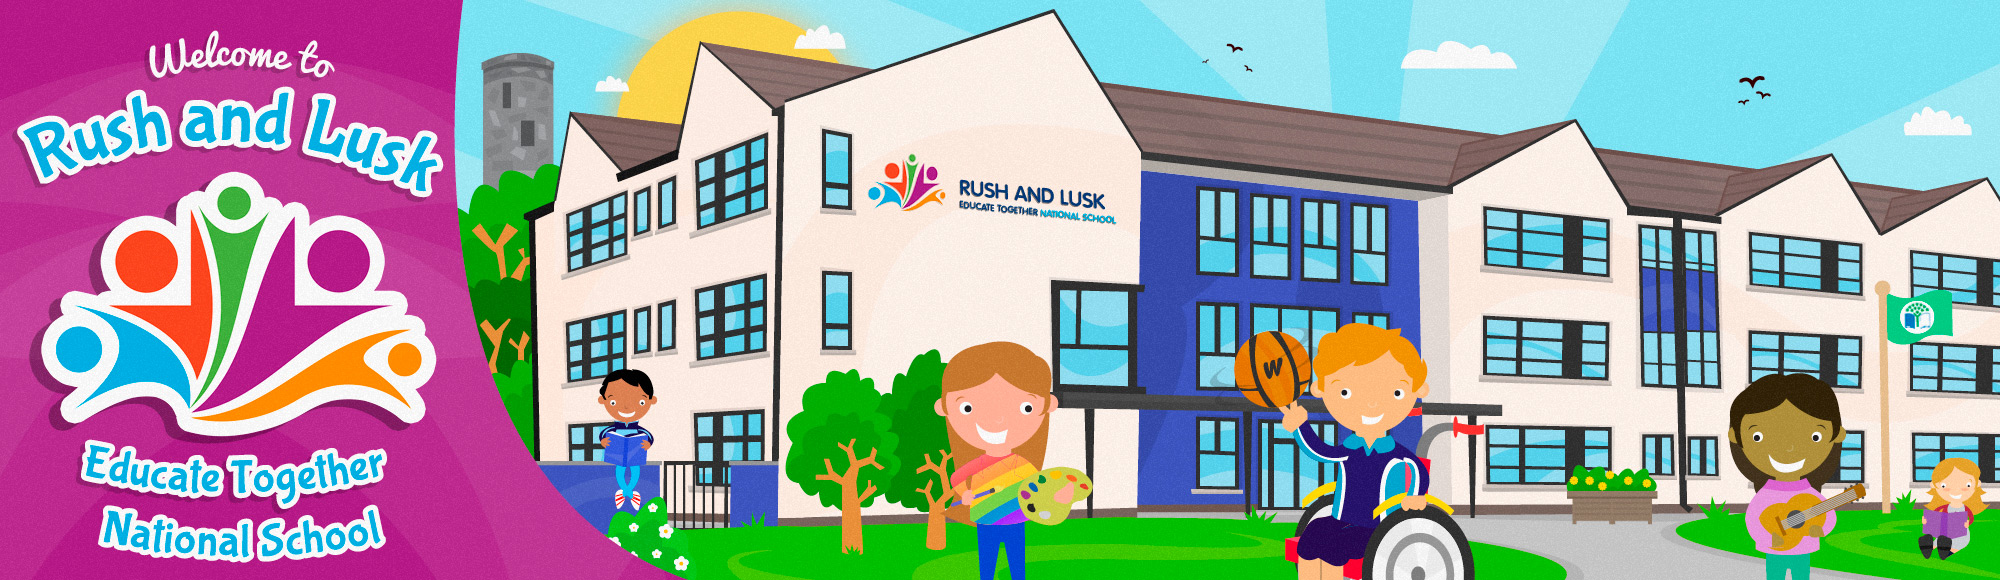 Rush and Lusk Educate Together National School, Lusk, Co. Dublin